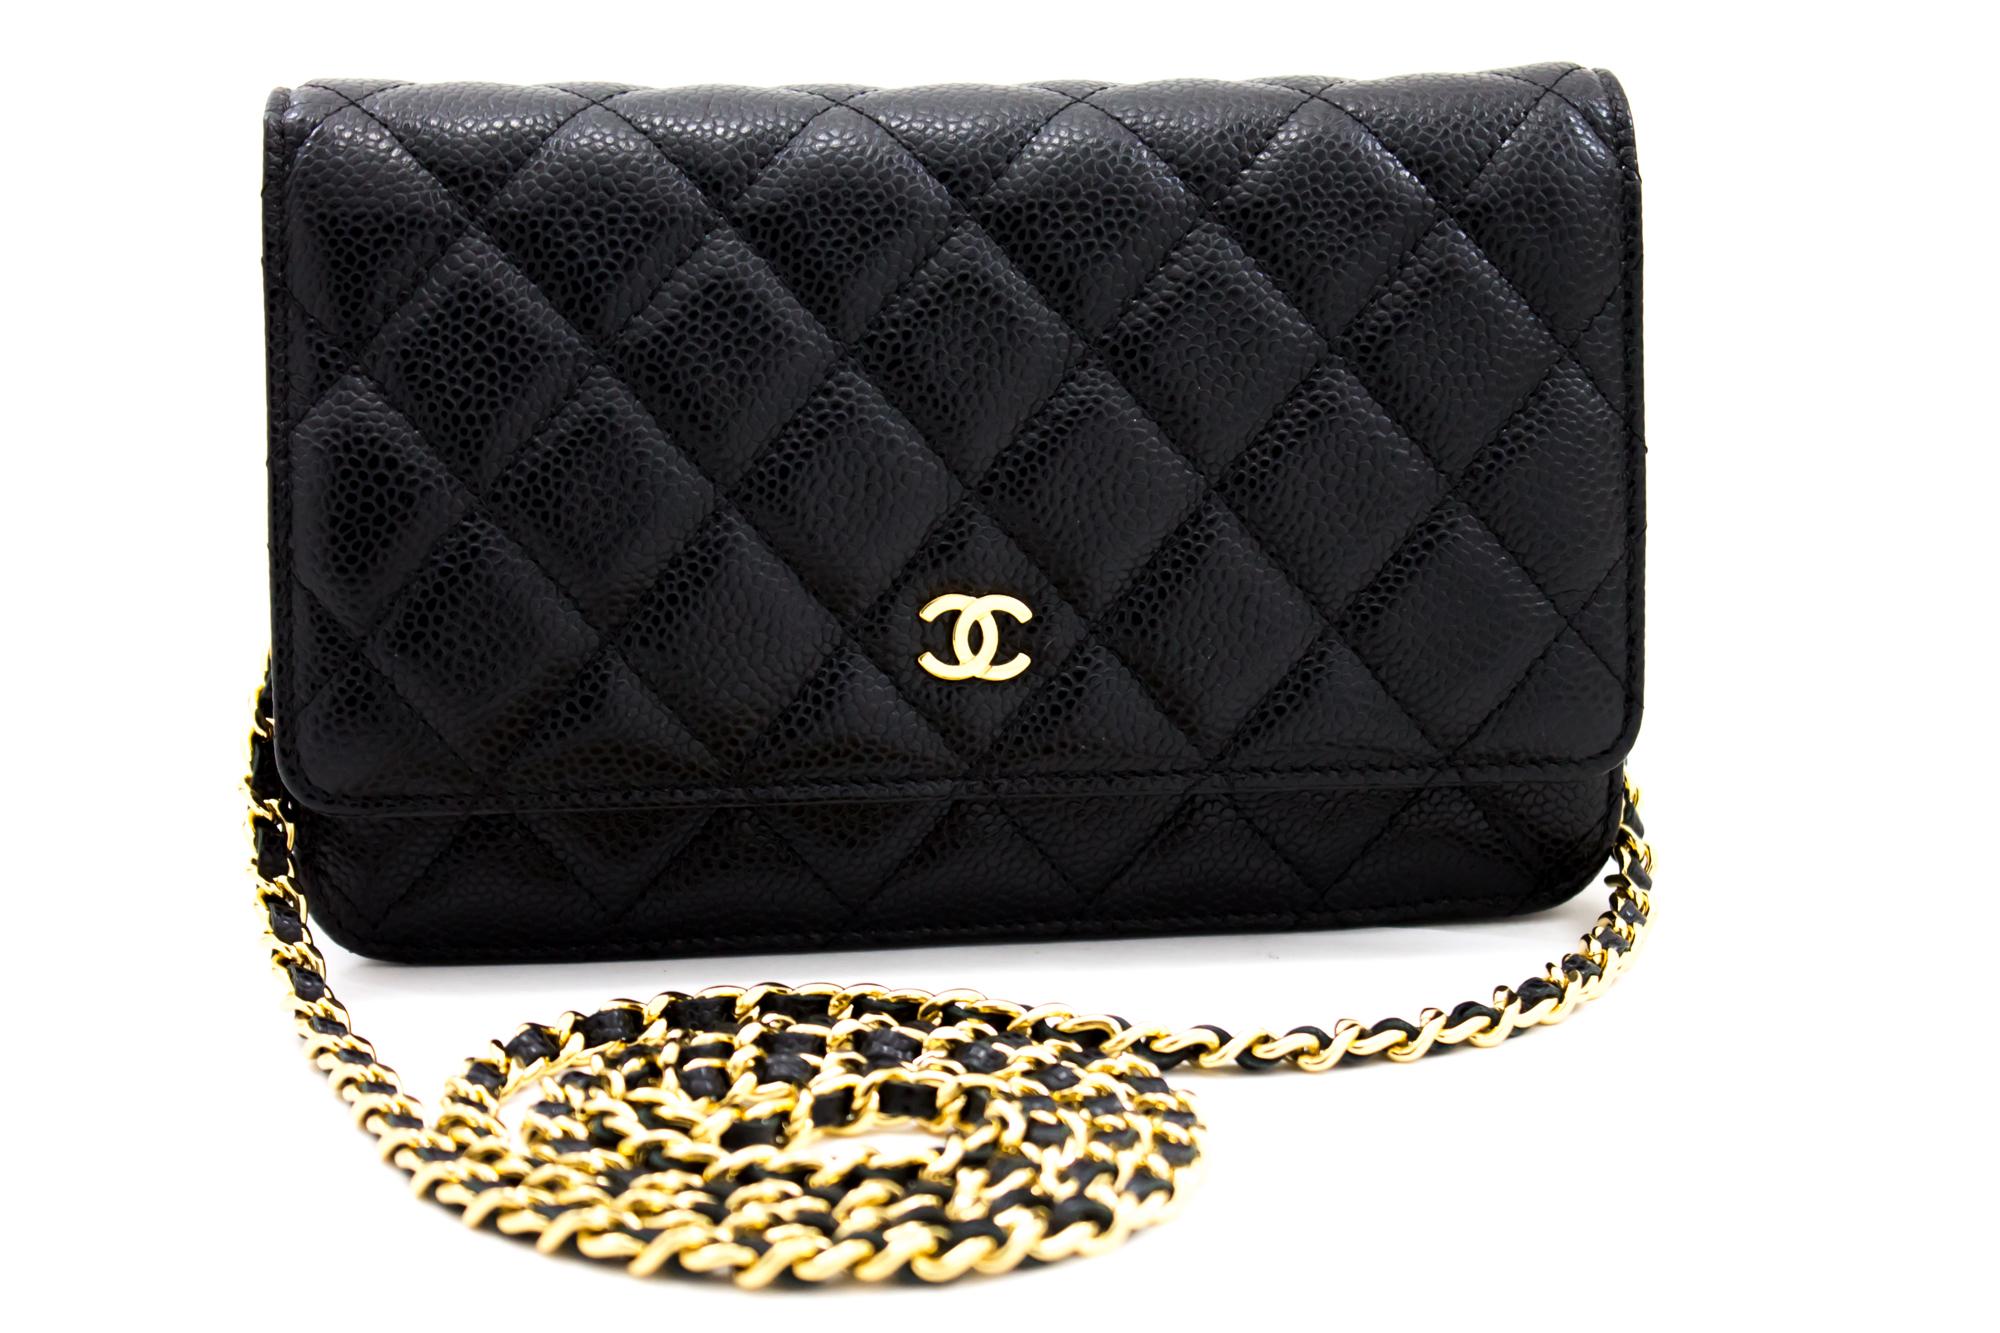 An authentic CHANEL Caviar Wallet On Chain WOC Black Shoulder Bag Crossbody. The color is Black. The outside material is Leather. The pattern is Solid. This item is Contemporary. The year of manufacture would be 2015.
Conditions & Ratings
Outside